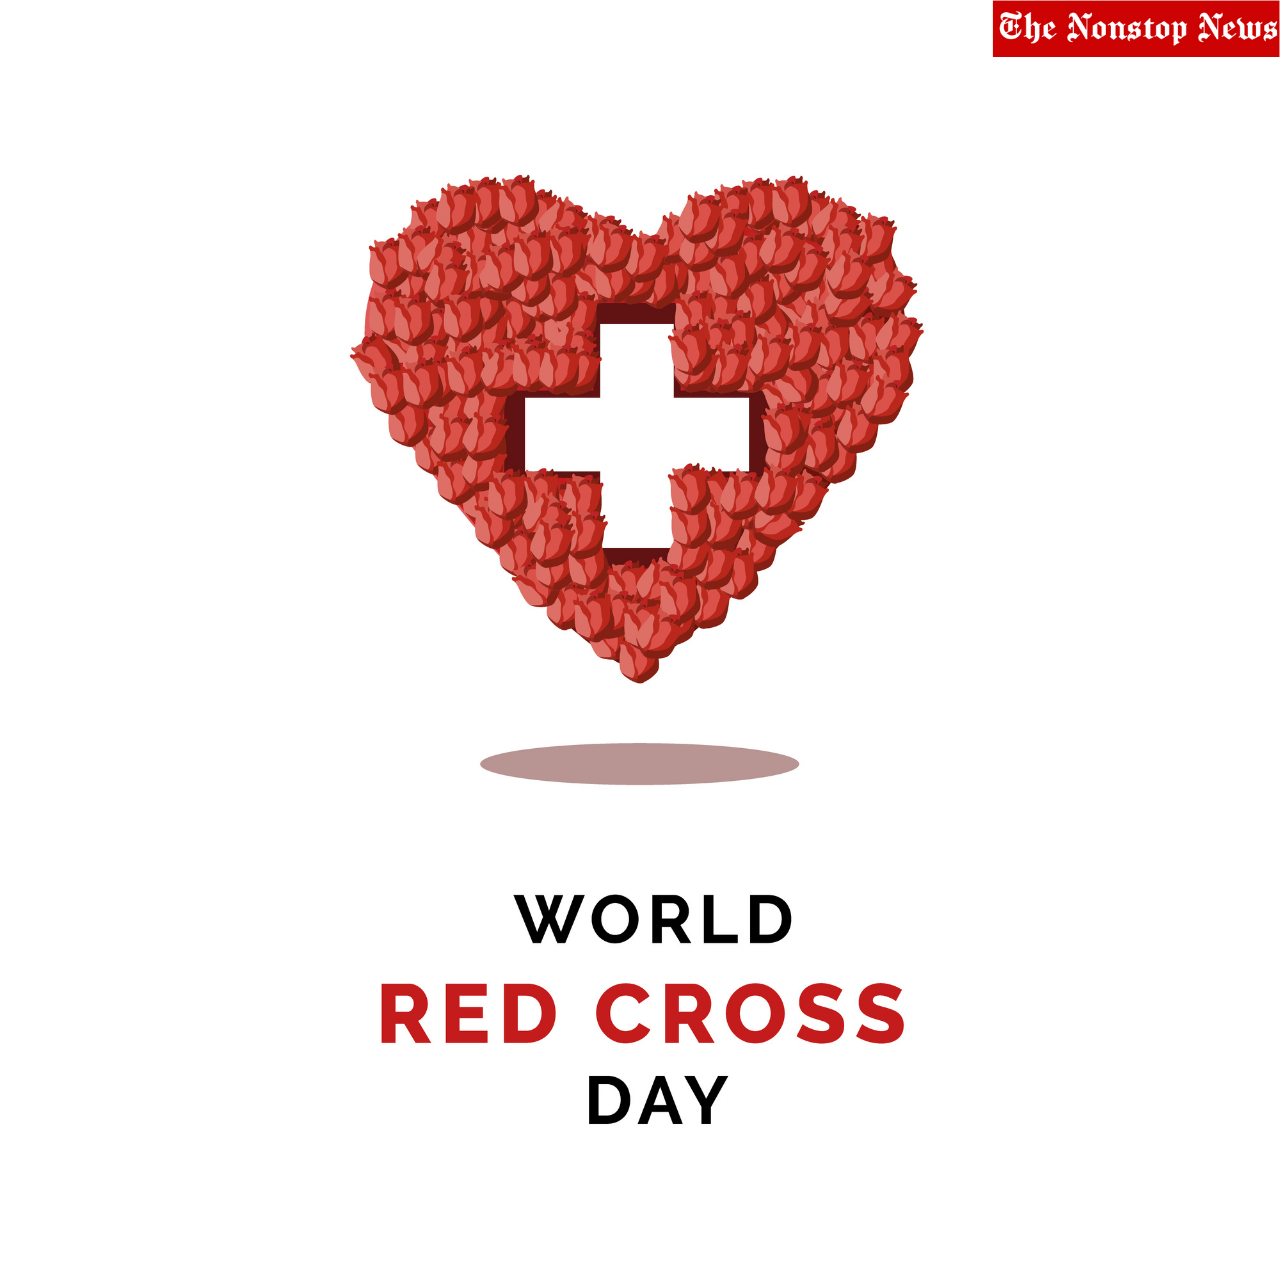 World Red Cross Day 2022: Current Theme, Wishes, Quotes, Greetings, HD Images, Posters To Raise Awareness